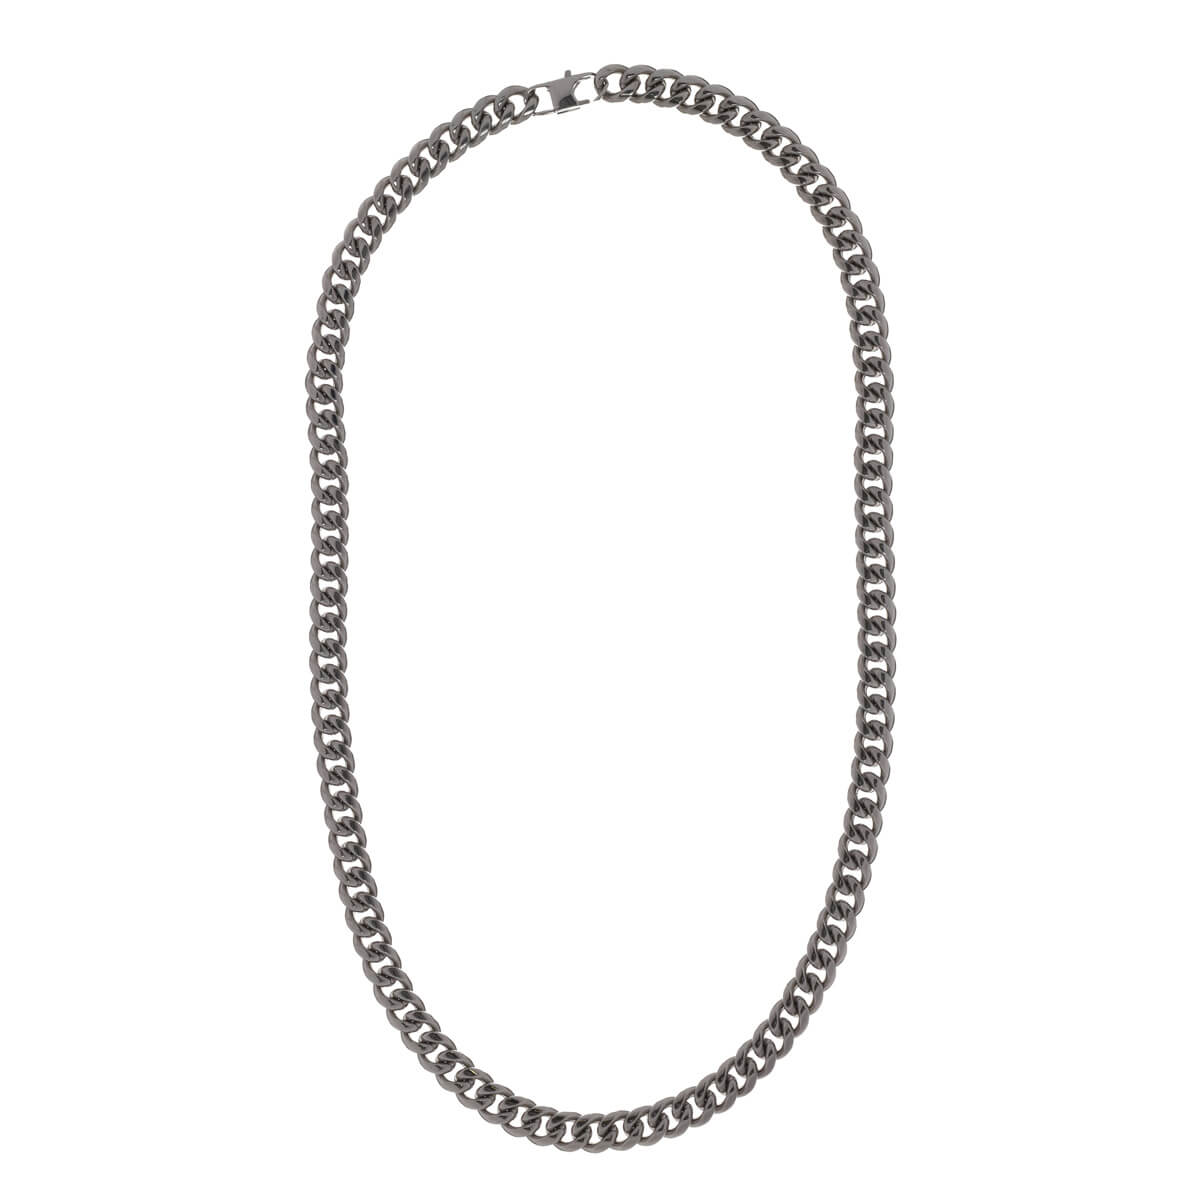 Rounded steel armor chain necklace 55cm